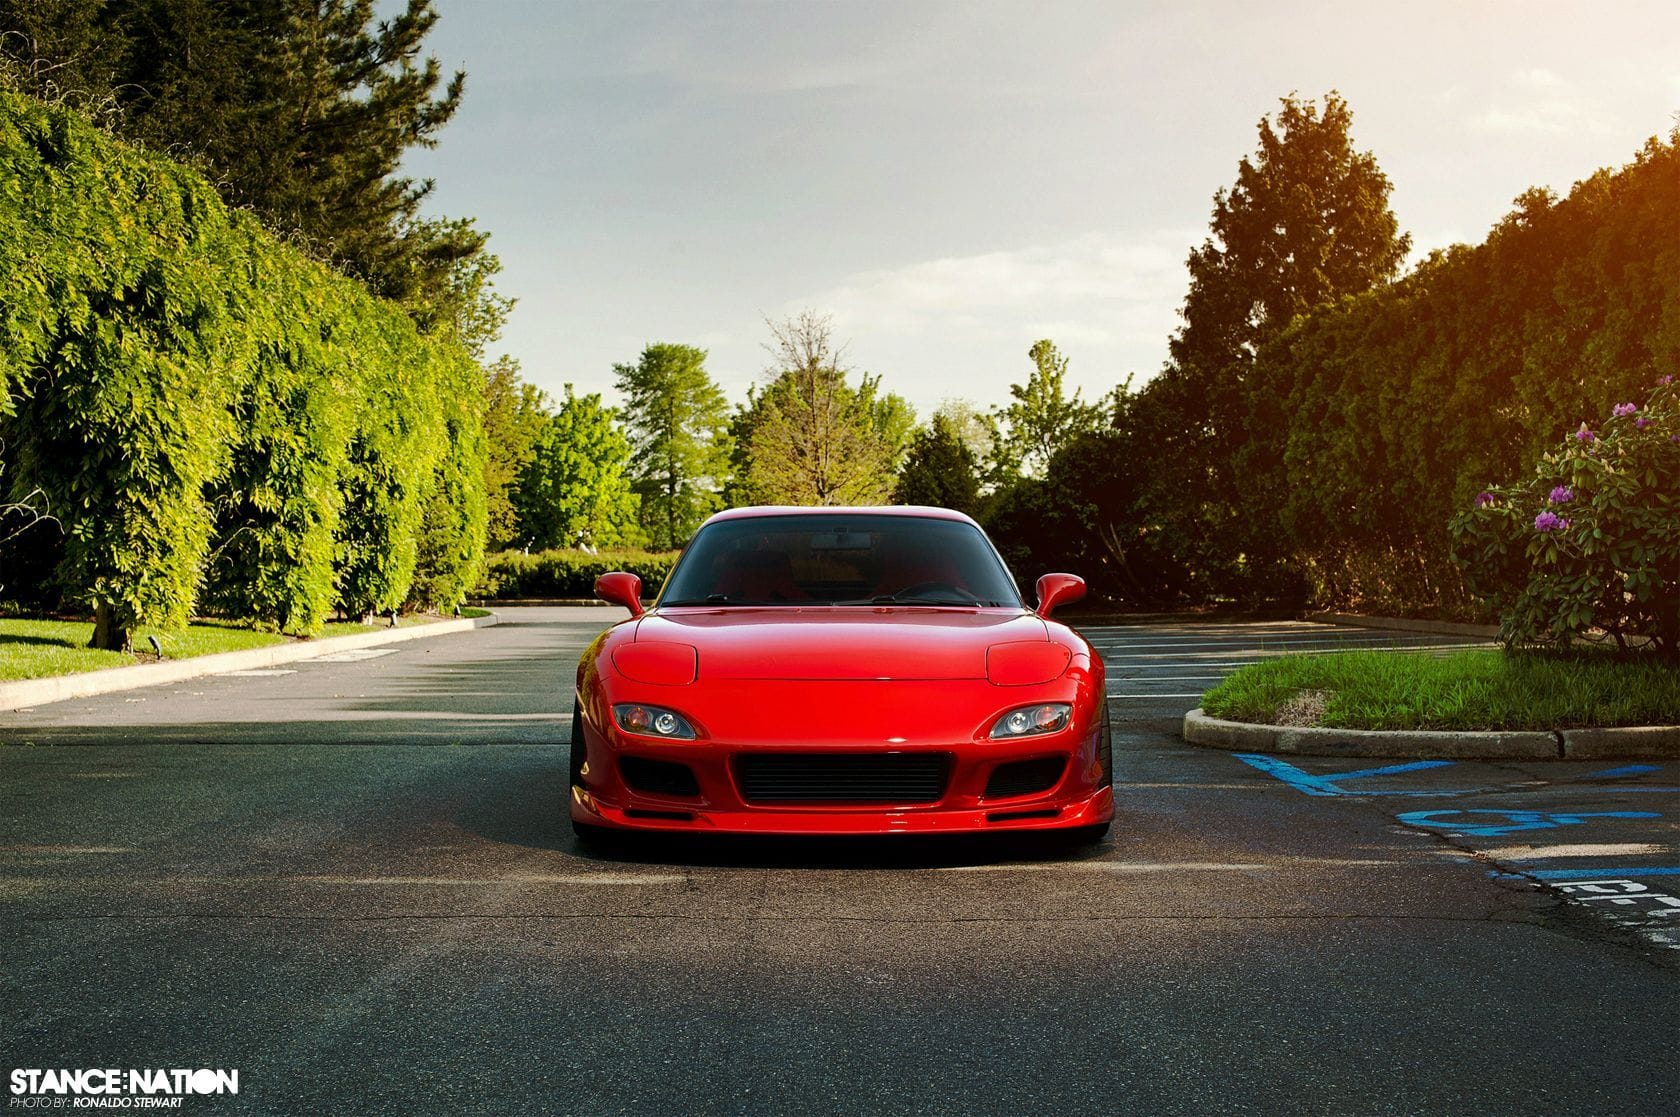 Exterior Body Parts - Wanted! GP Sports Front Bumper - New or Used - 1991 to 2001 Mazda RX-7 - Scituate, RI 02857, United States